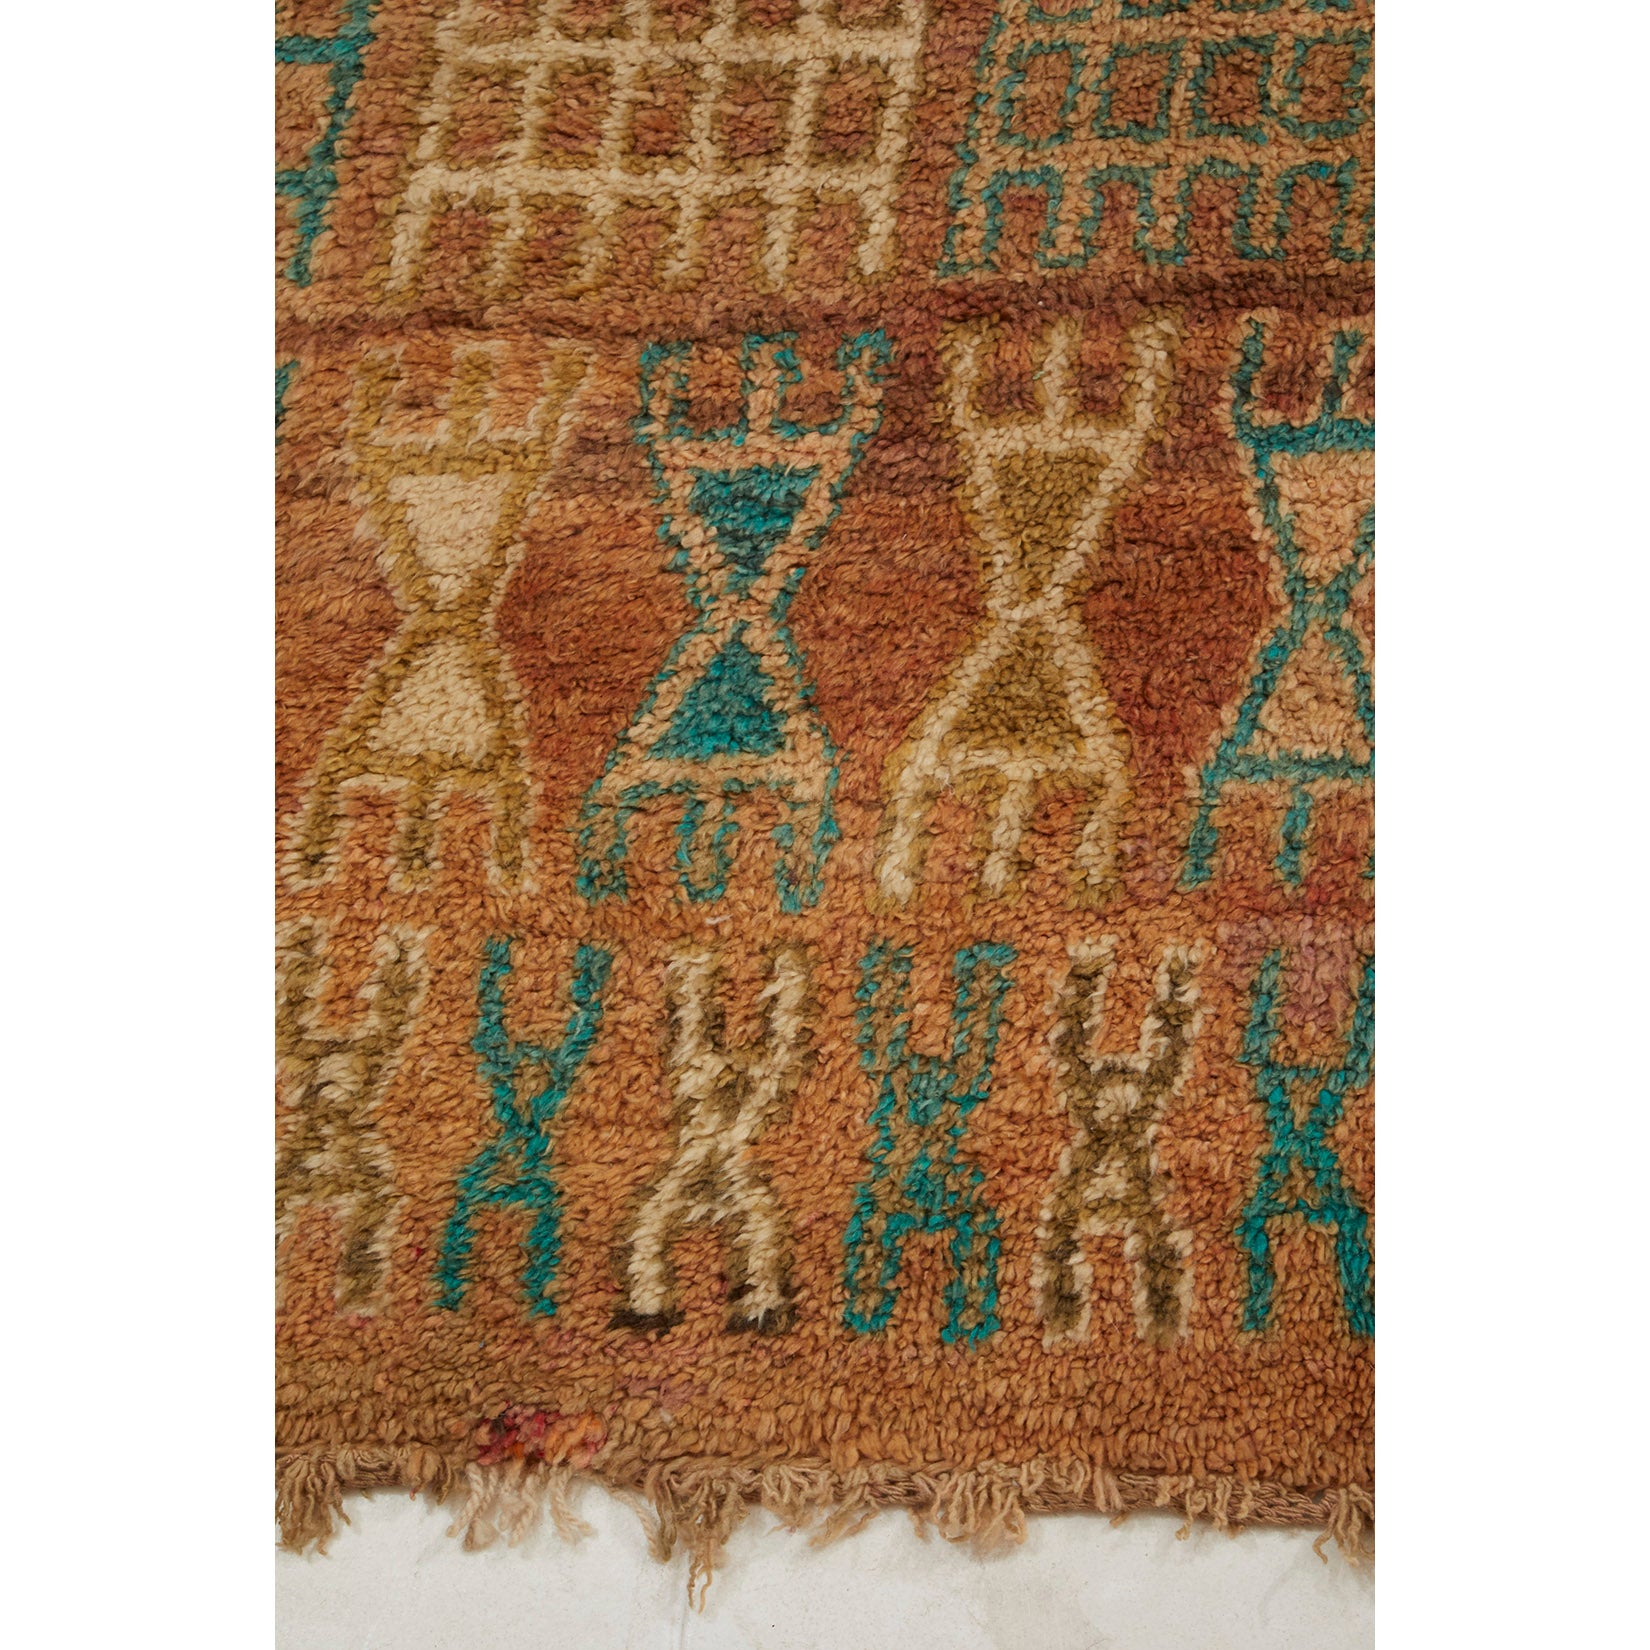 Rust colored Moroccan berber area rug with details in teal and white - Kantara | Moroccan Rugs